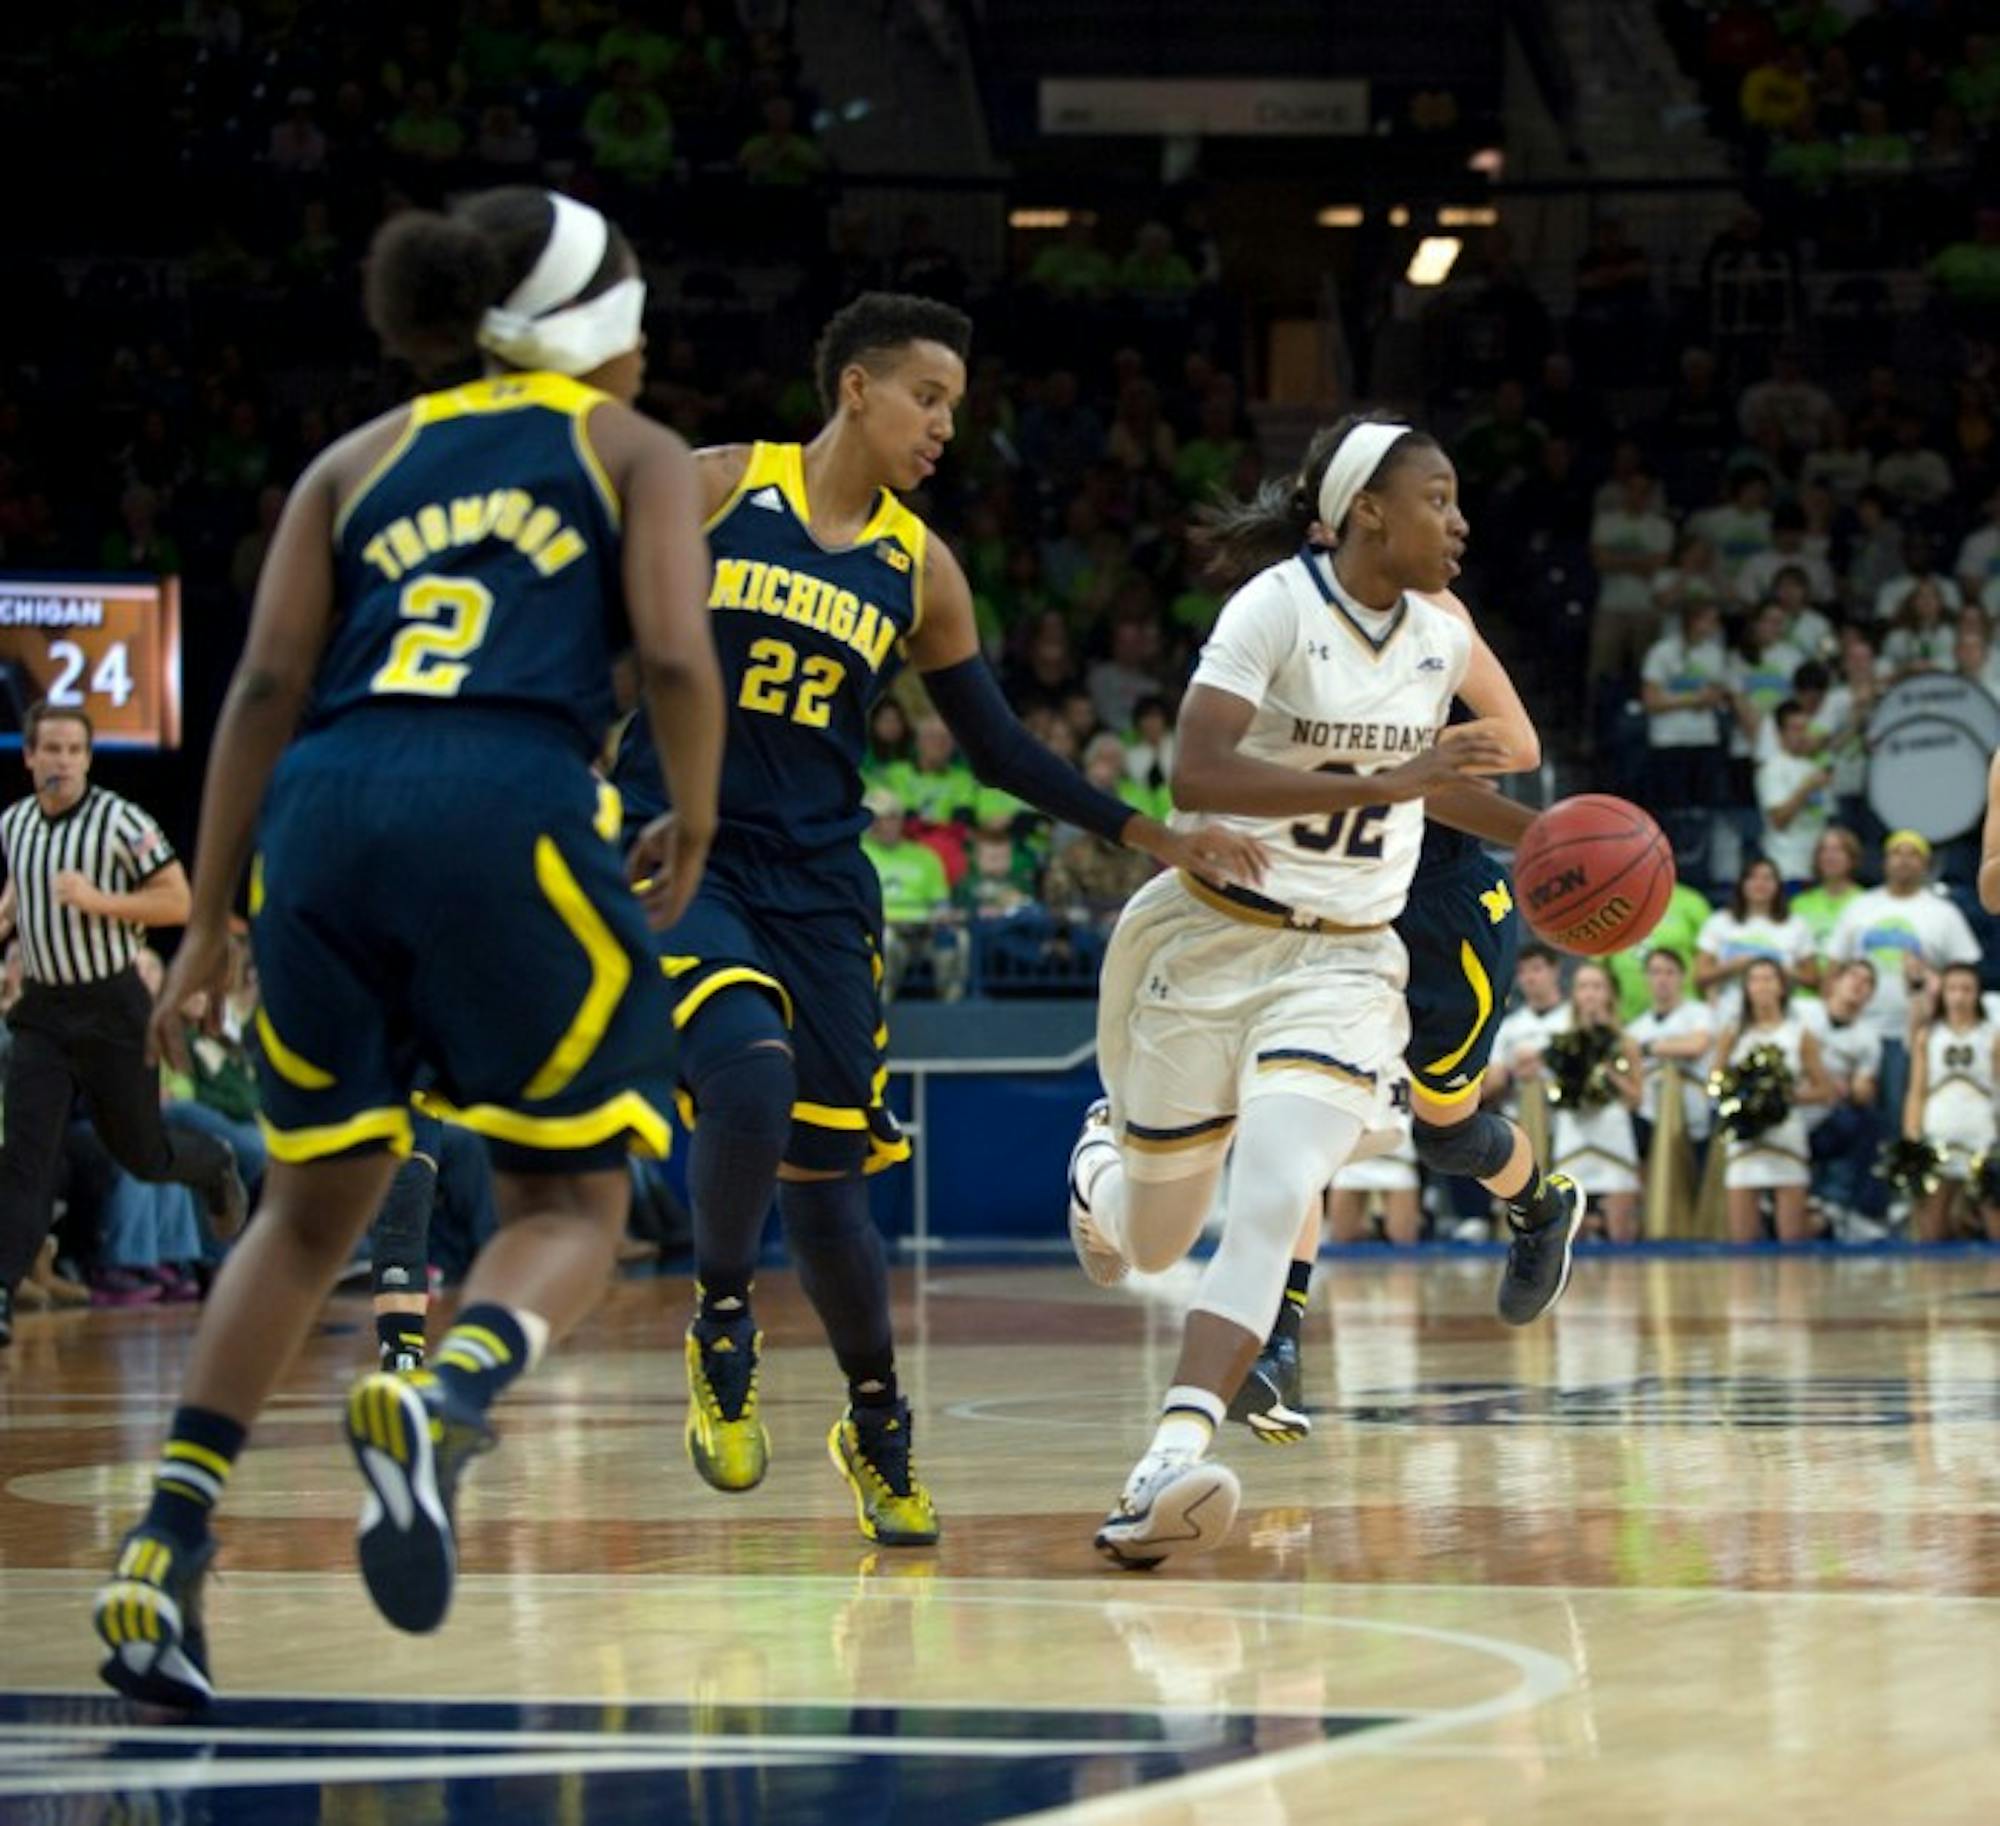 Irish junior guard Jewell Loyd looks for an open teammate during Notre Dame’s 70-50 victory over rival Michigan on Dec. 13 at Purcell Pavilion. Loyd scored 14 points and pulled down 5 rebounds in the win.